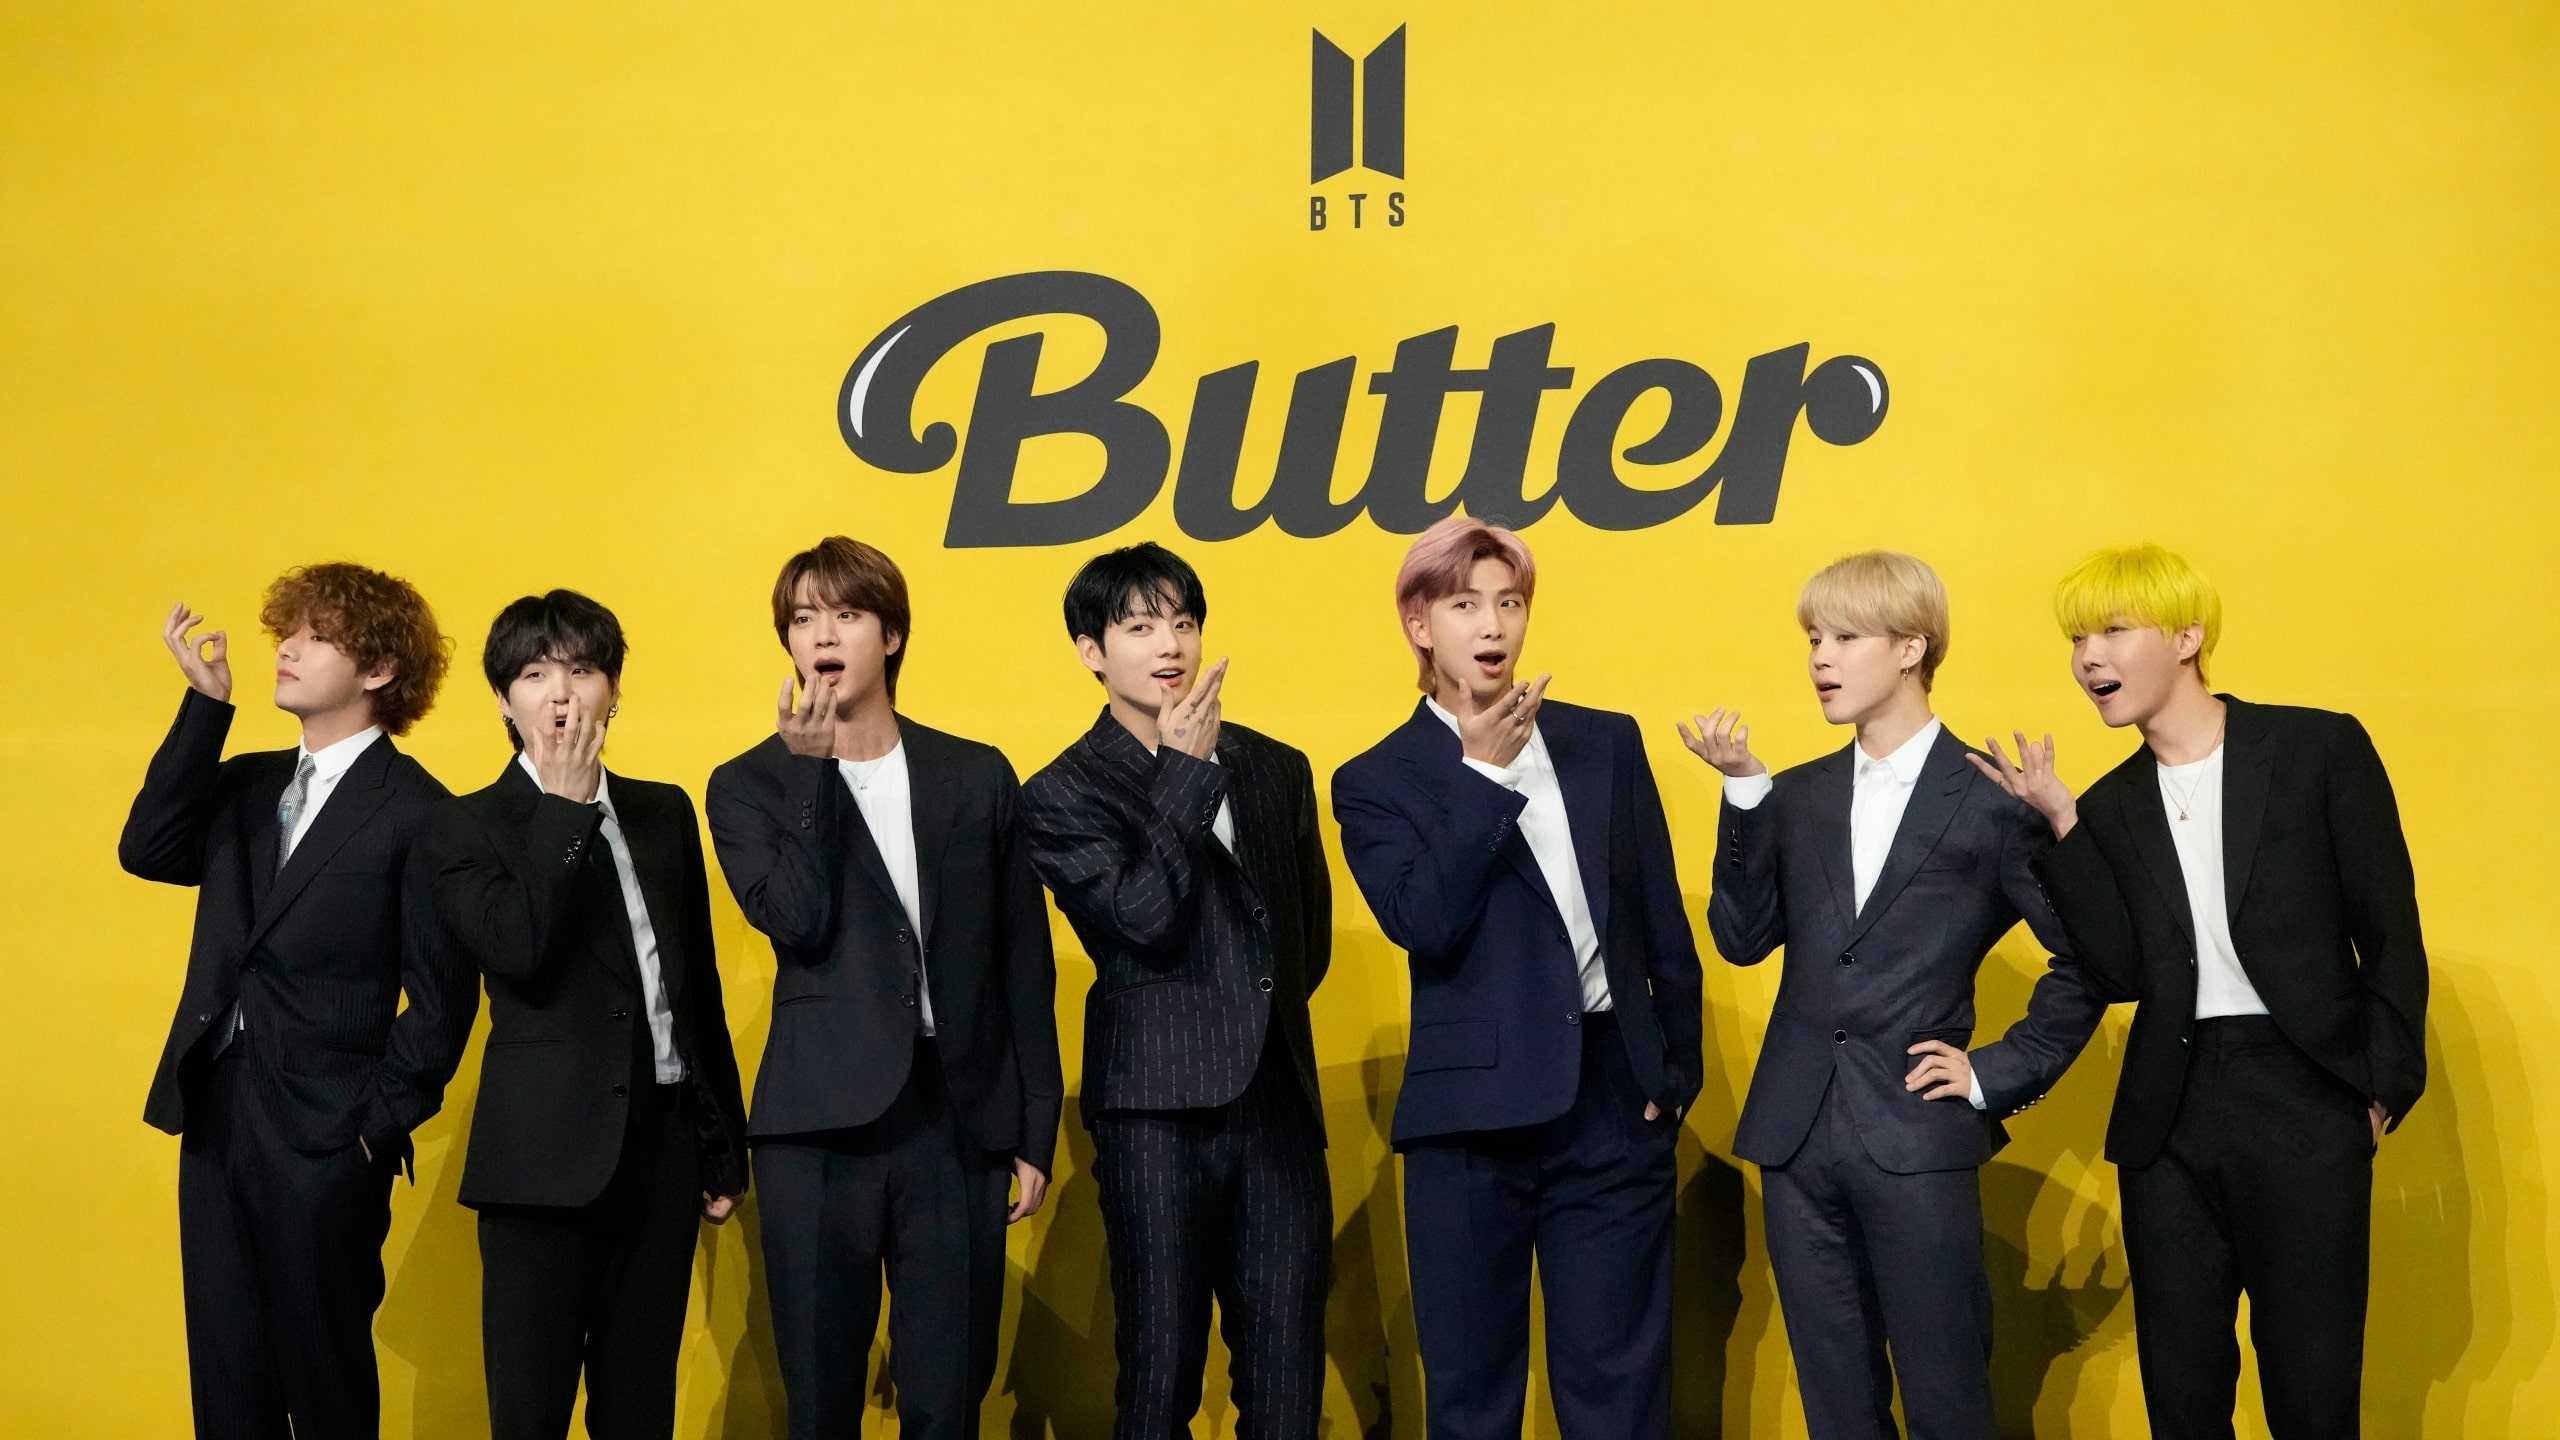 BTS Members' Individual Blue Hair Looks in "Butter" Promotions - wide 1